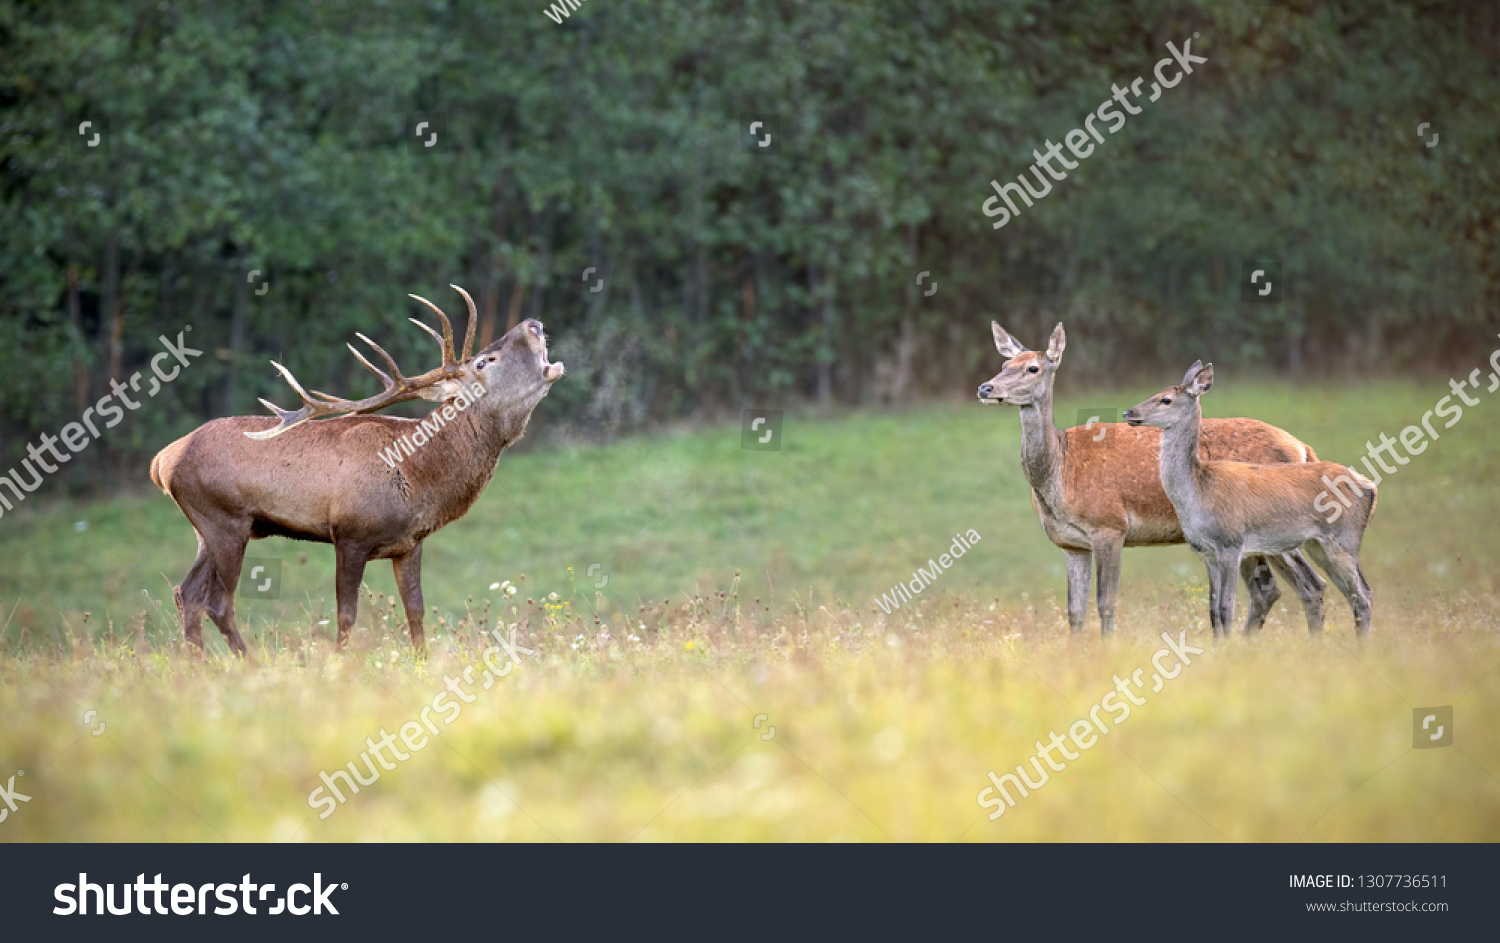 Red deer, cervus elaphus, herd in rutting season with stag bellowing. Animal family in nature. Group of wild mammals in wilderness in mating season. Space for copy. #1307736511